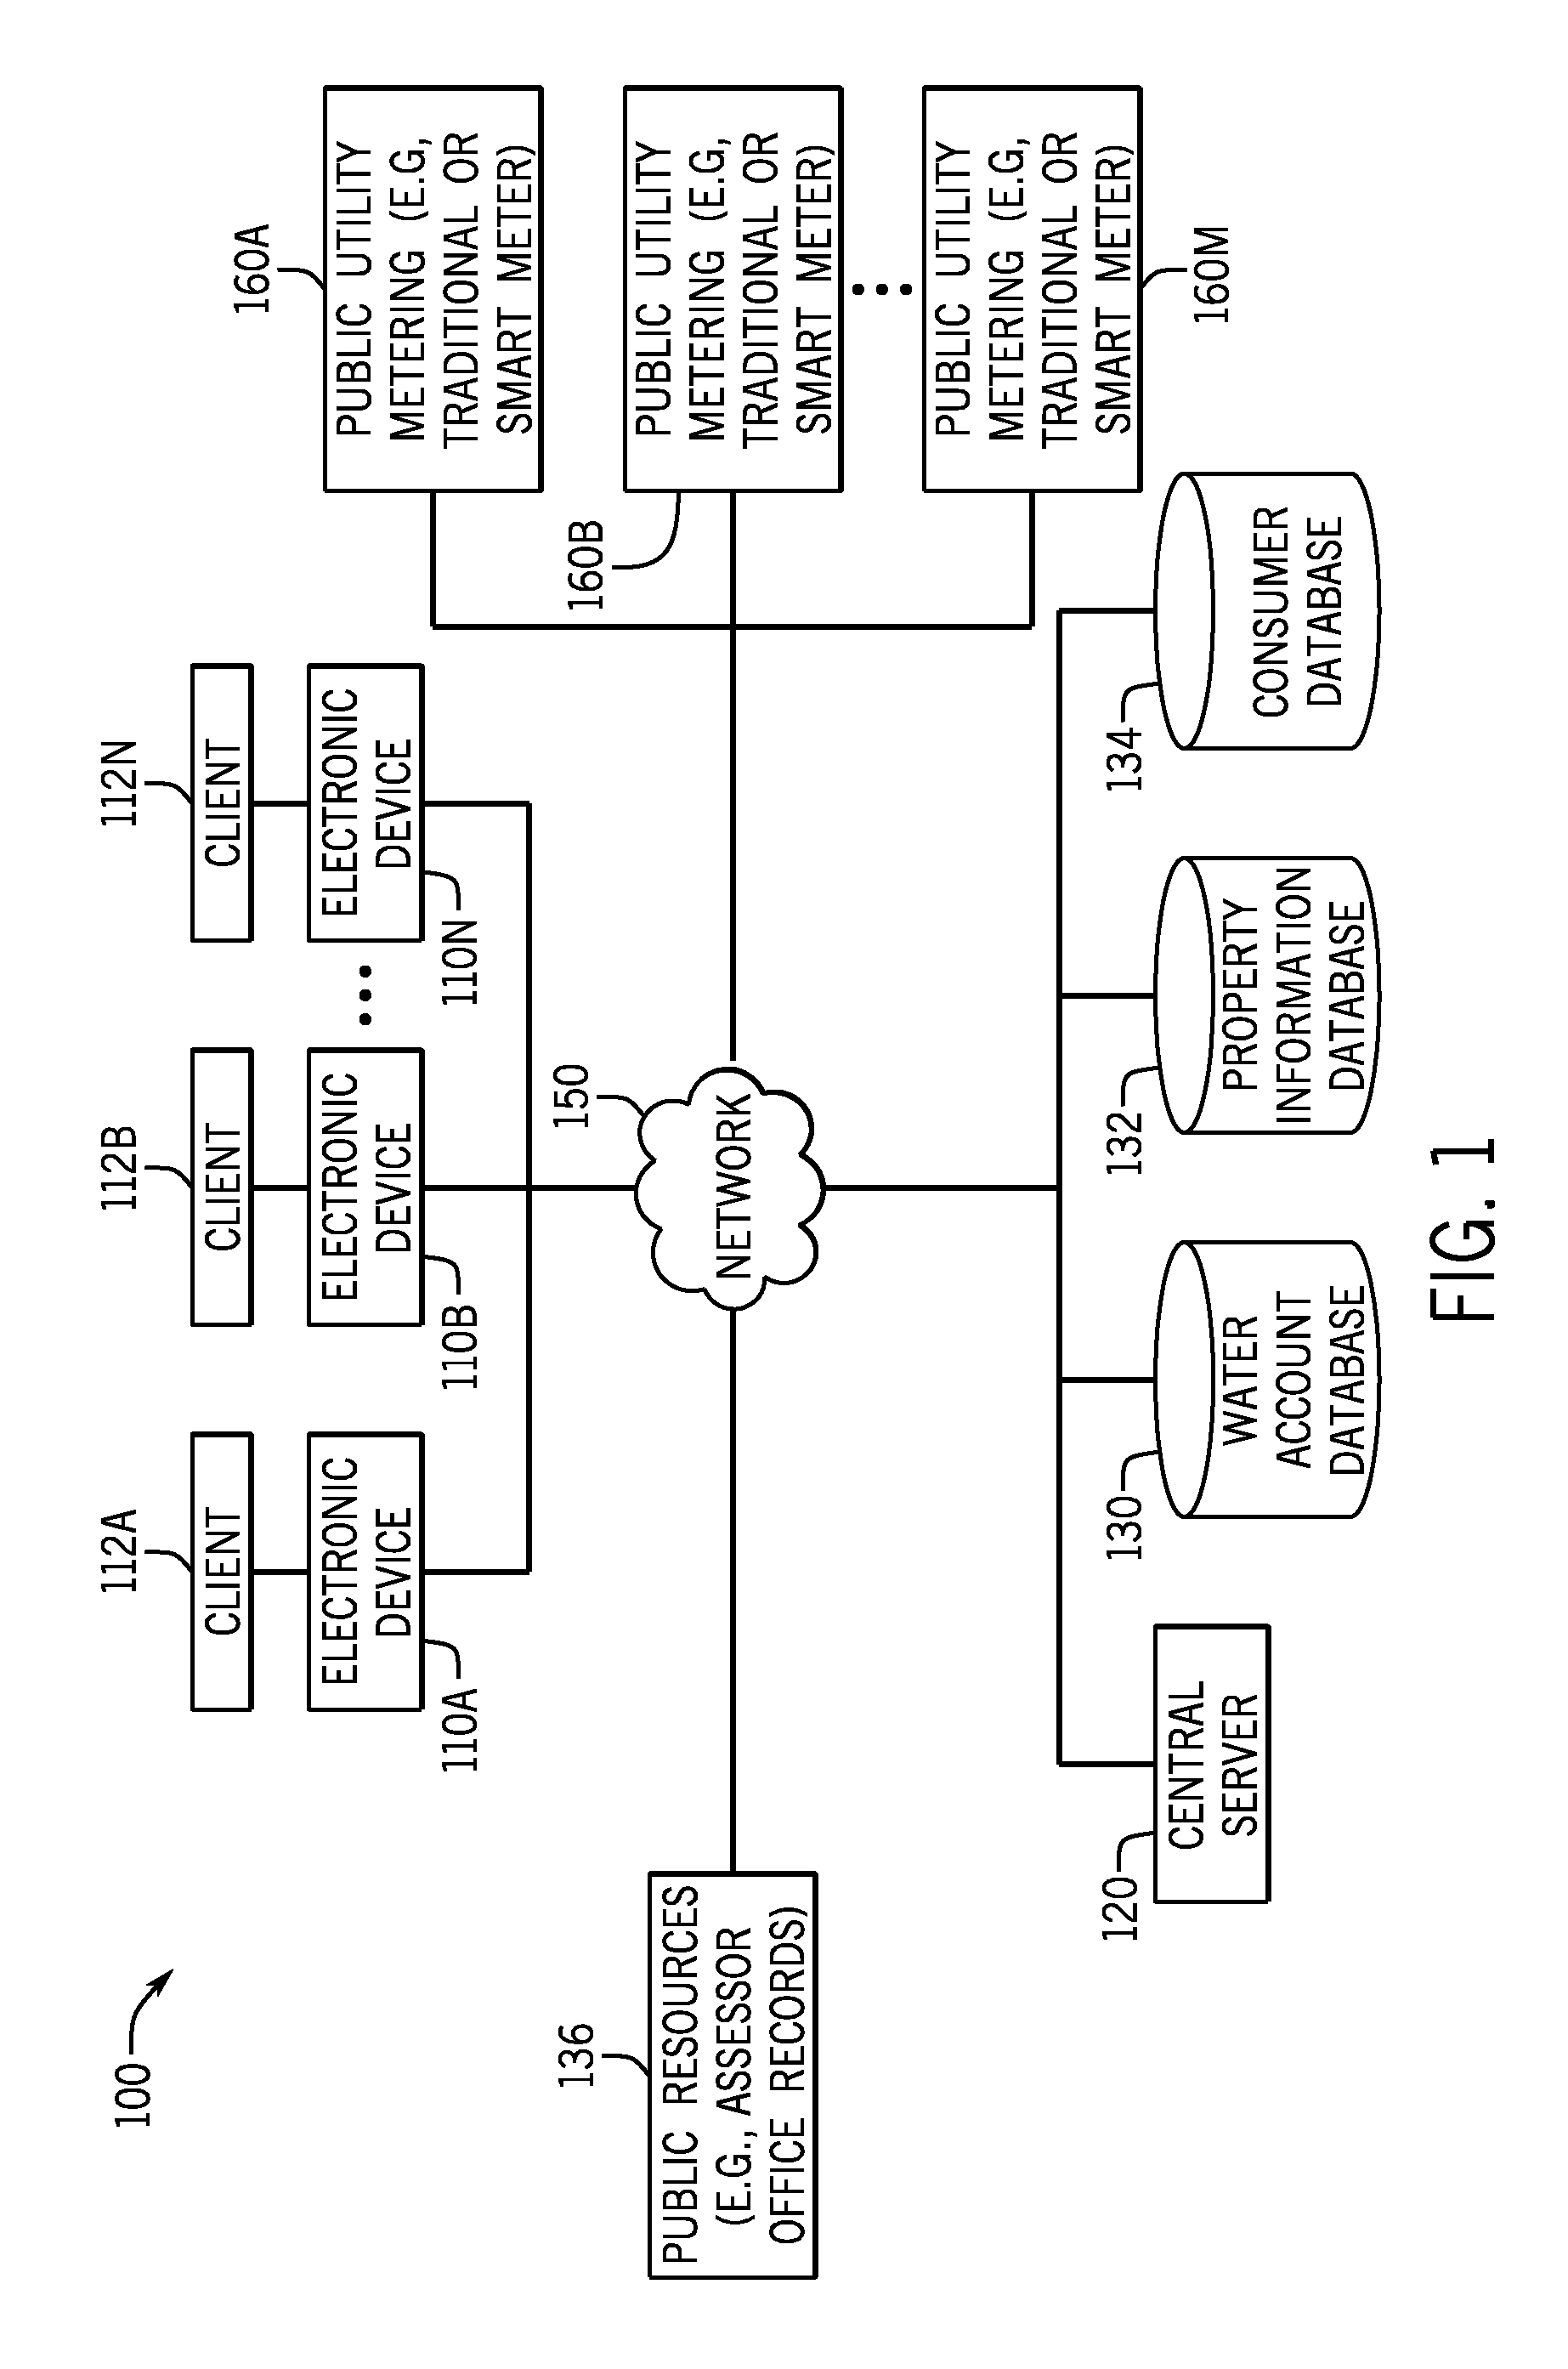 System and method for a customer engagement platform to increase residential water use efficiency